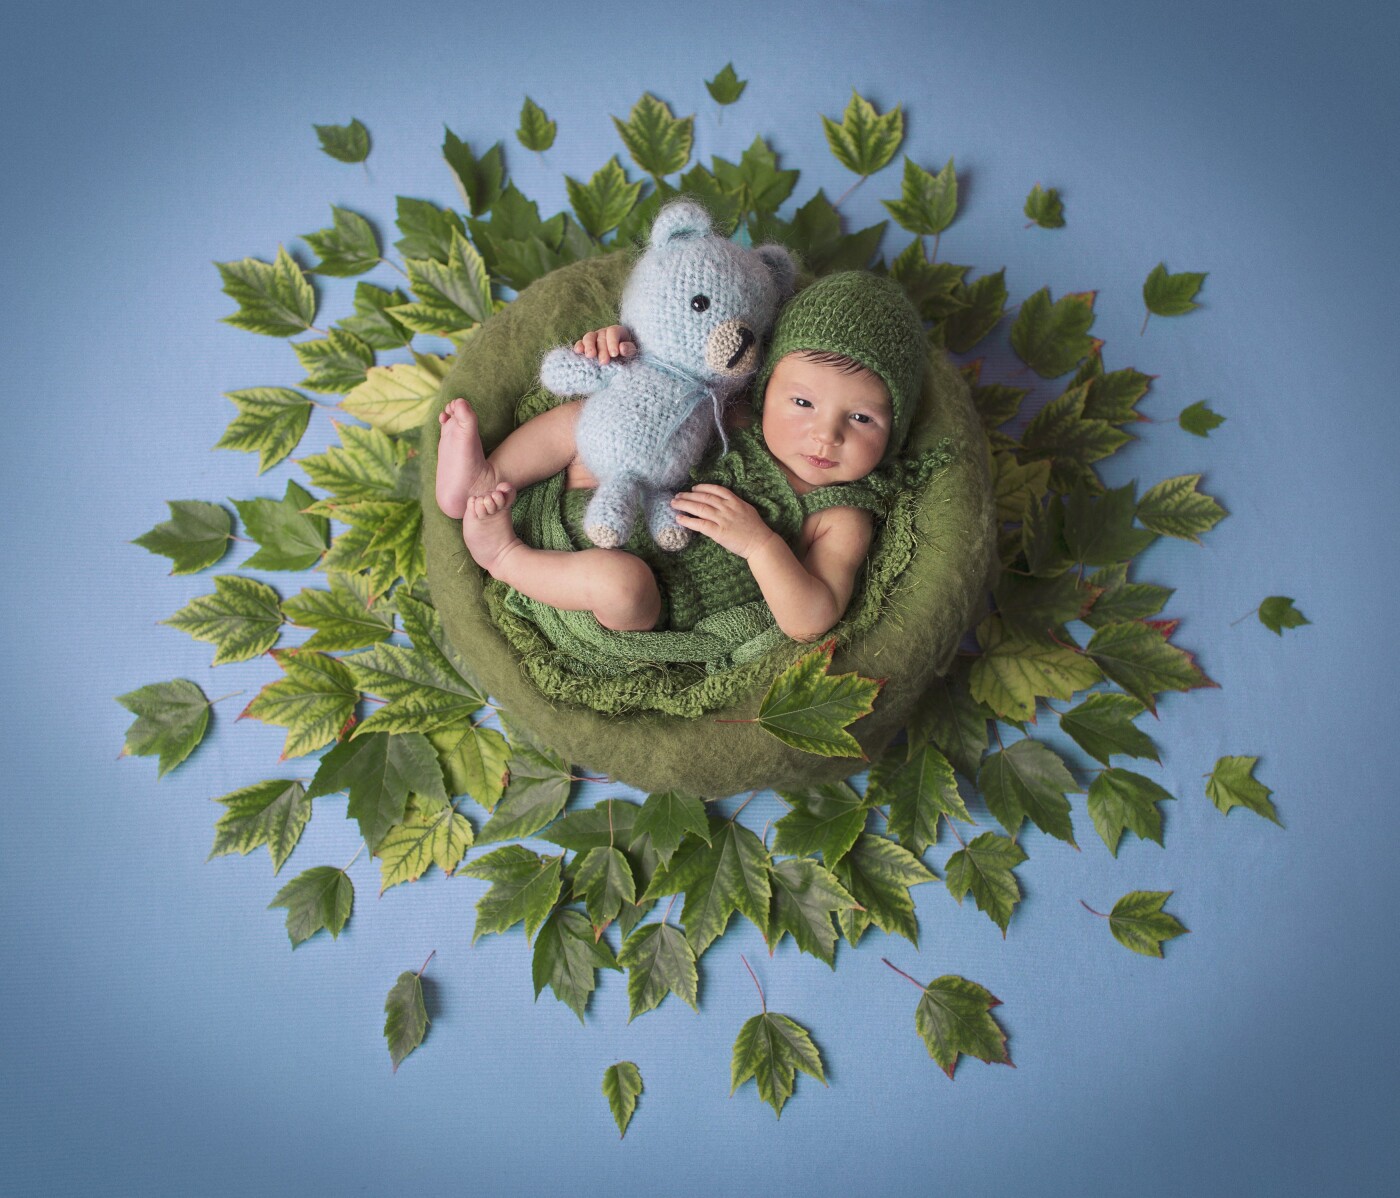 "Autumn Baby" by JustGaba photography<br />
<br />
Love this set up. I love nature, so tried to "play" with leaves for this set up. Fall season gives you lots of inspiration!:) also really wanted to work with greens. So made this outfit myself for this set up. Baby boy was only 10days old<3<br />
<br />
www.justgaba.com<br />
www.facebook.com/justgaba/